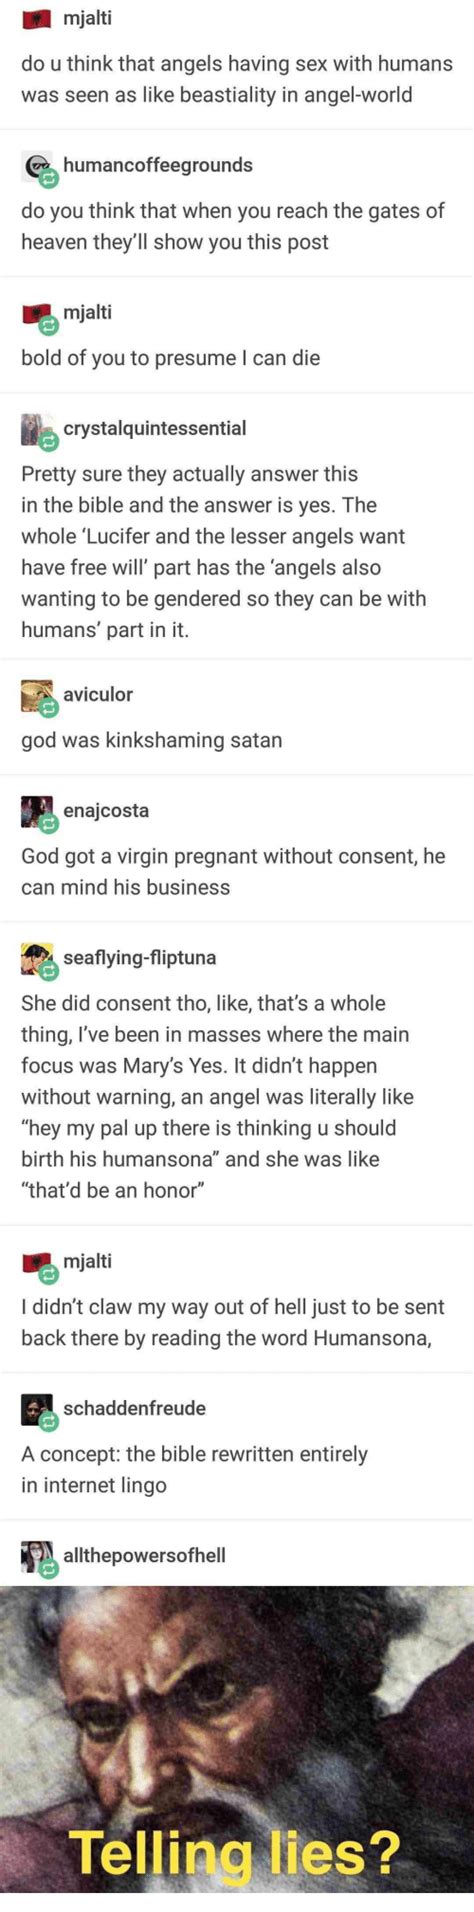 mjalti do u think that angels having sex with humans was